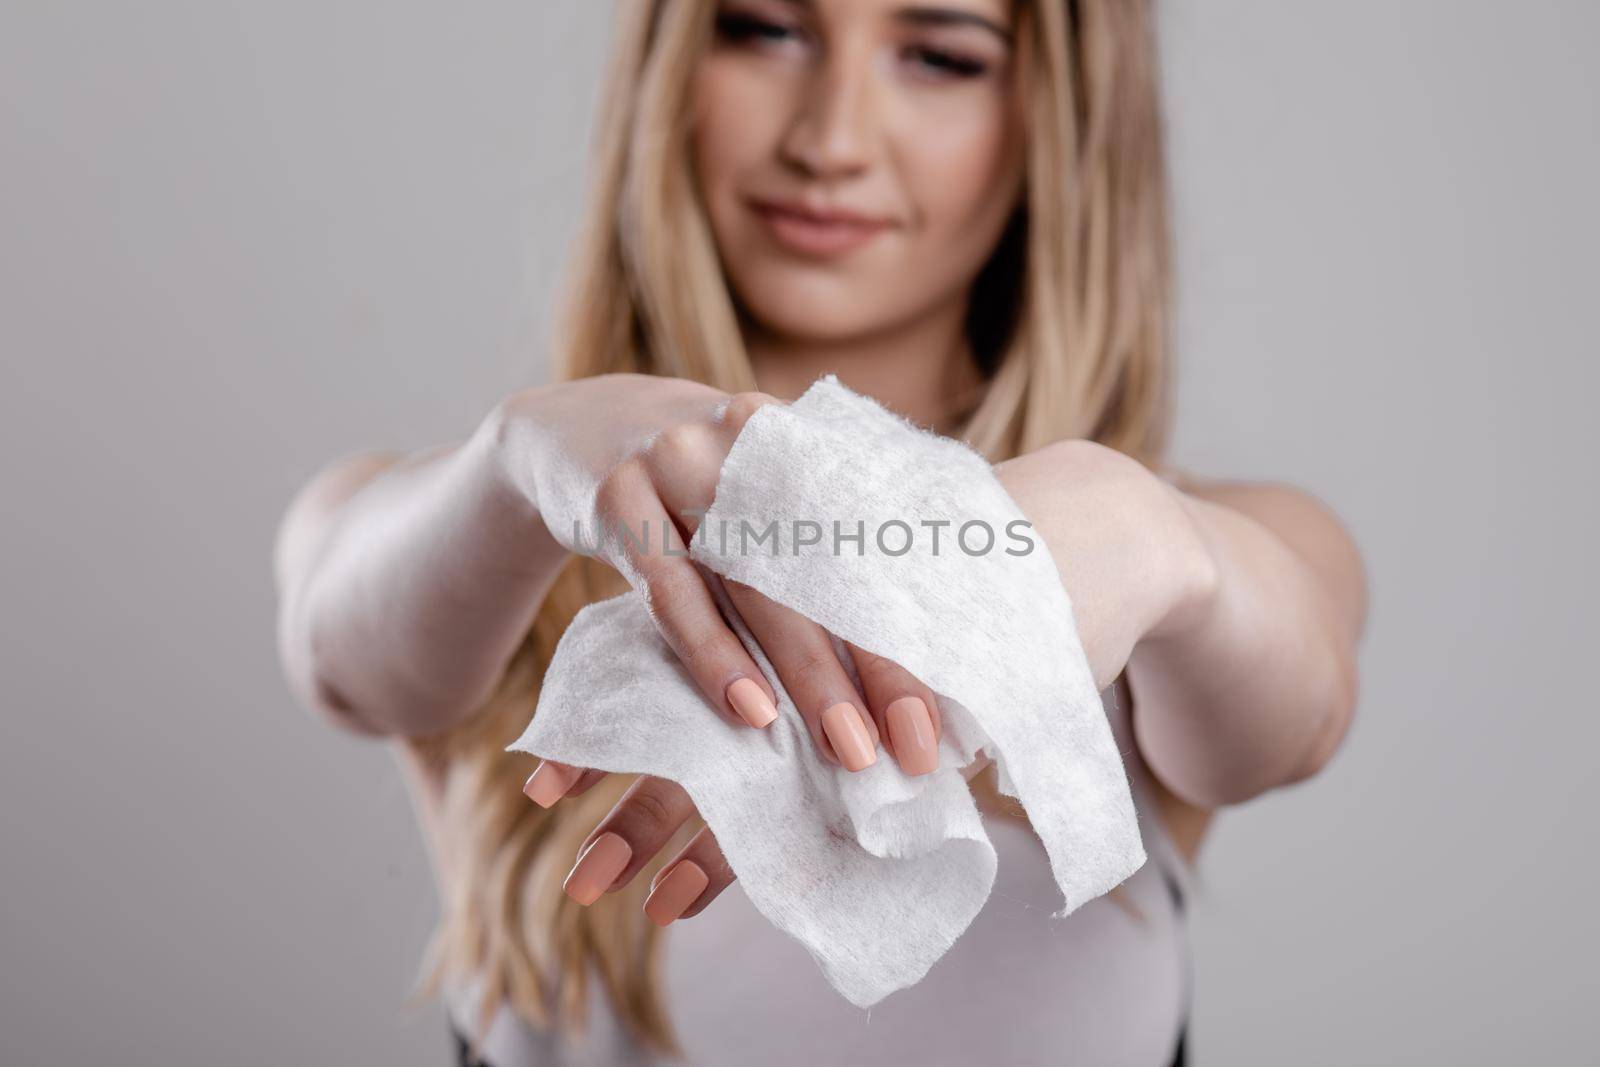 Prevention of infectious diseases - Cleaning hands with wet wipes by adamr